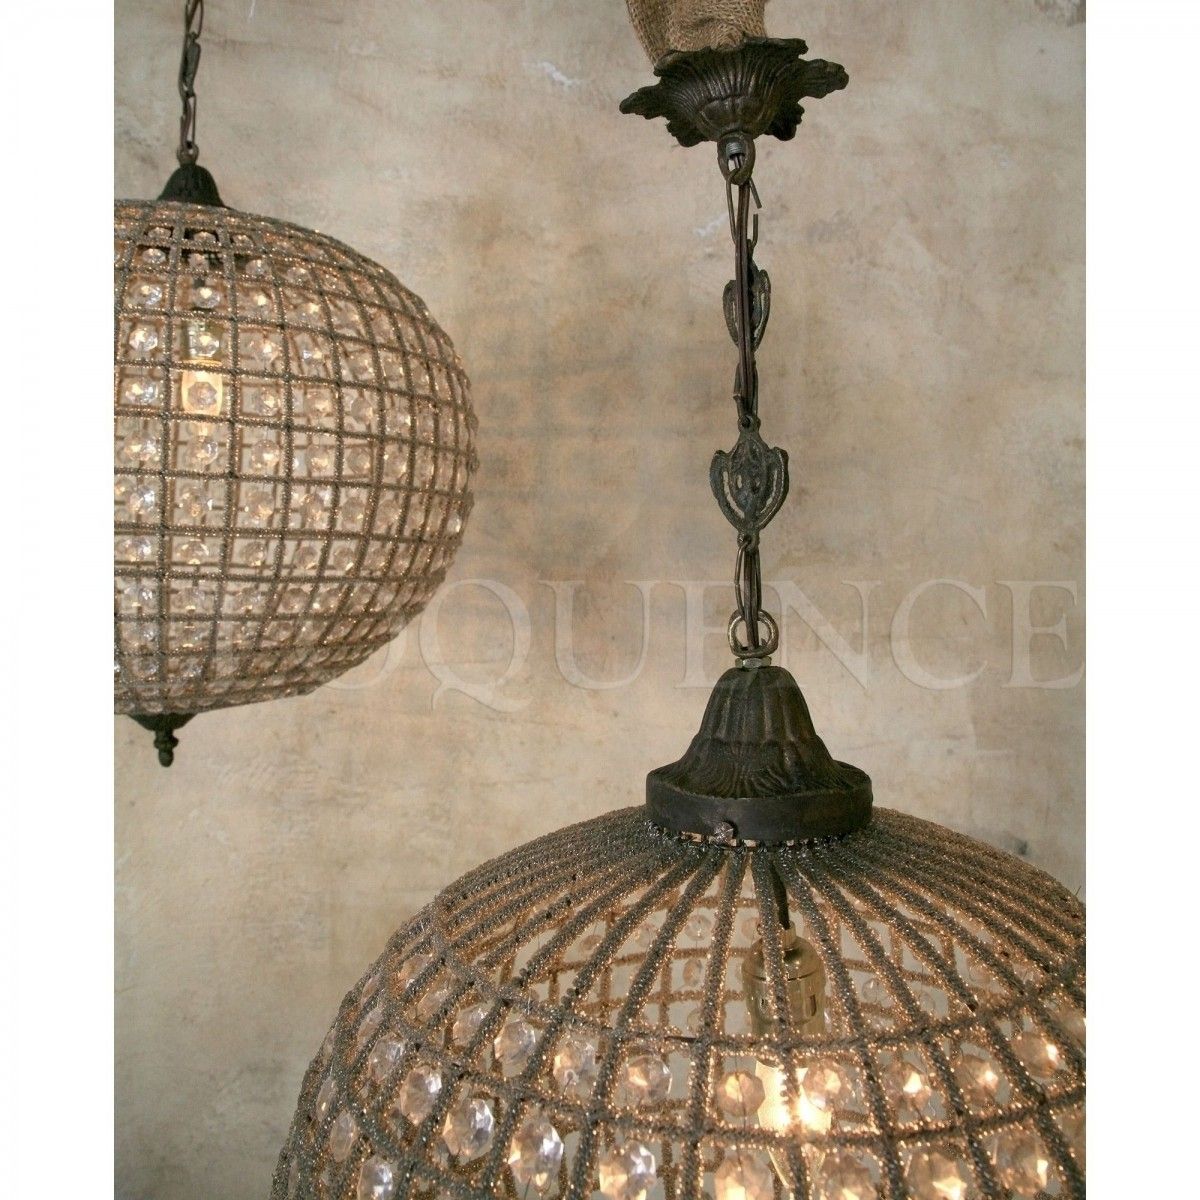 Eloquence Reproduction Globe Chandelier Candelabra Inc With Regard To Eloquence Globe Chandelier (View 10 of 12)